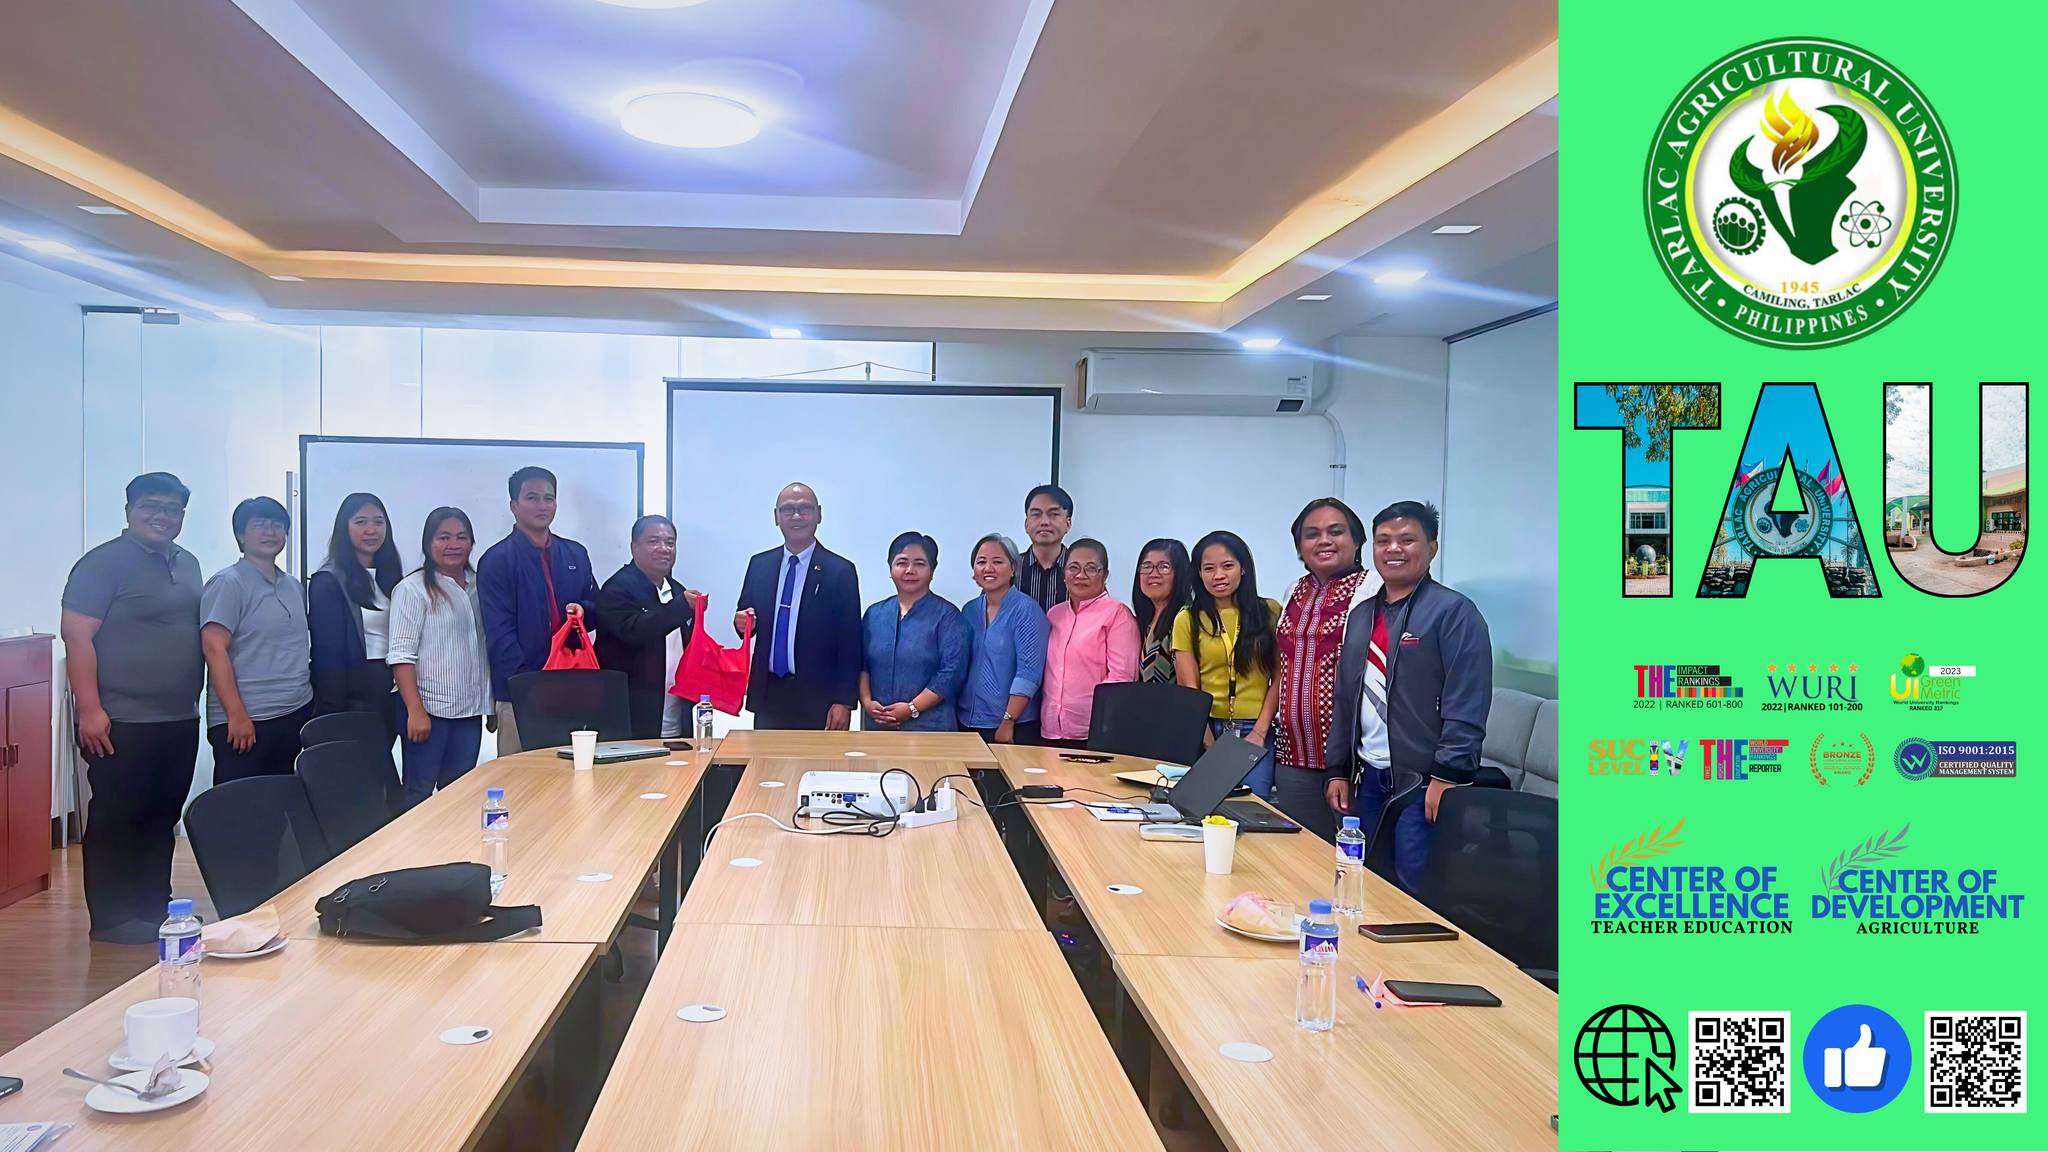 𝐂𝐀𝐏𝐓𝐔𝐑𝐄𝐃 𝐈𝐍 𝐋𝐄𝐍𝐒 | The Planning and Development Office (PDO) team, led by its new Officer-in-Charge (OIC) Director Dr. Leonell P. Lijauco, engages in a productive benchmarking and consultation session with several members of the Technological University of the Philippines (TUP) administration, headed by TUP President Dr. Reynaldo P. Ramos, on 28 June